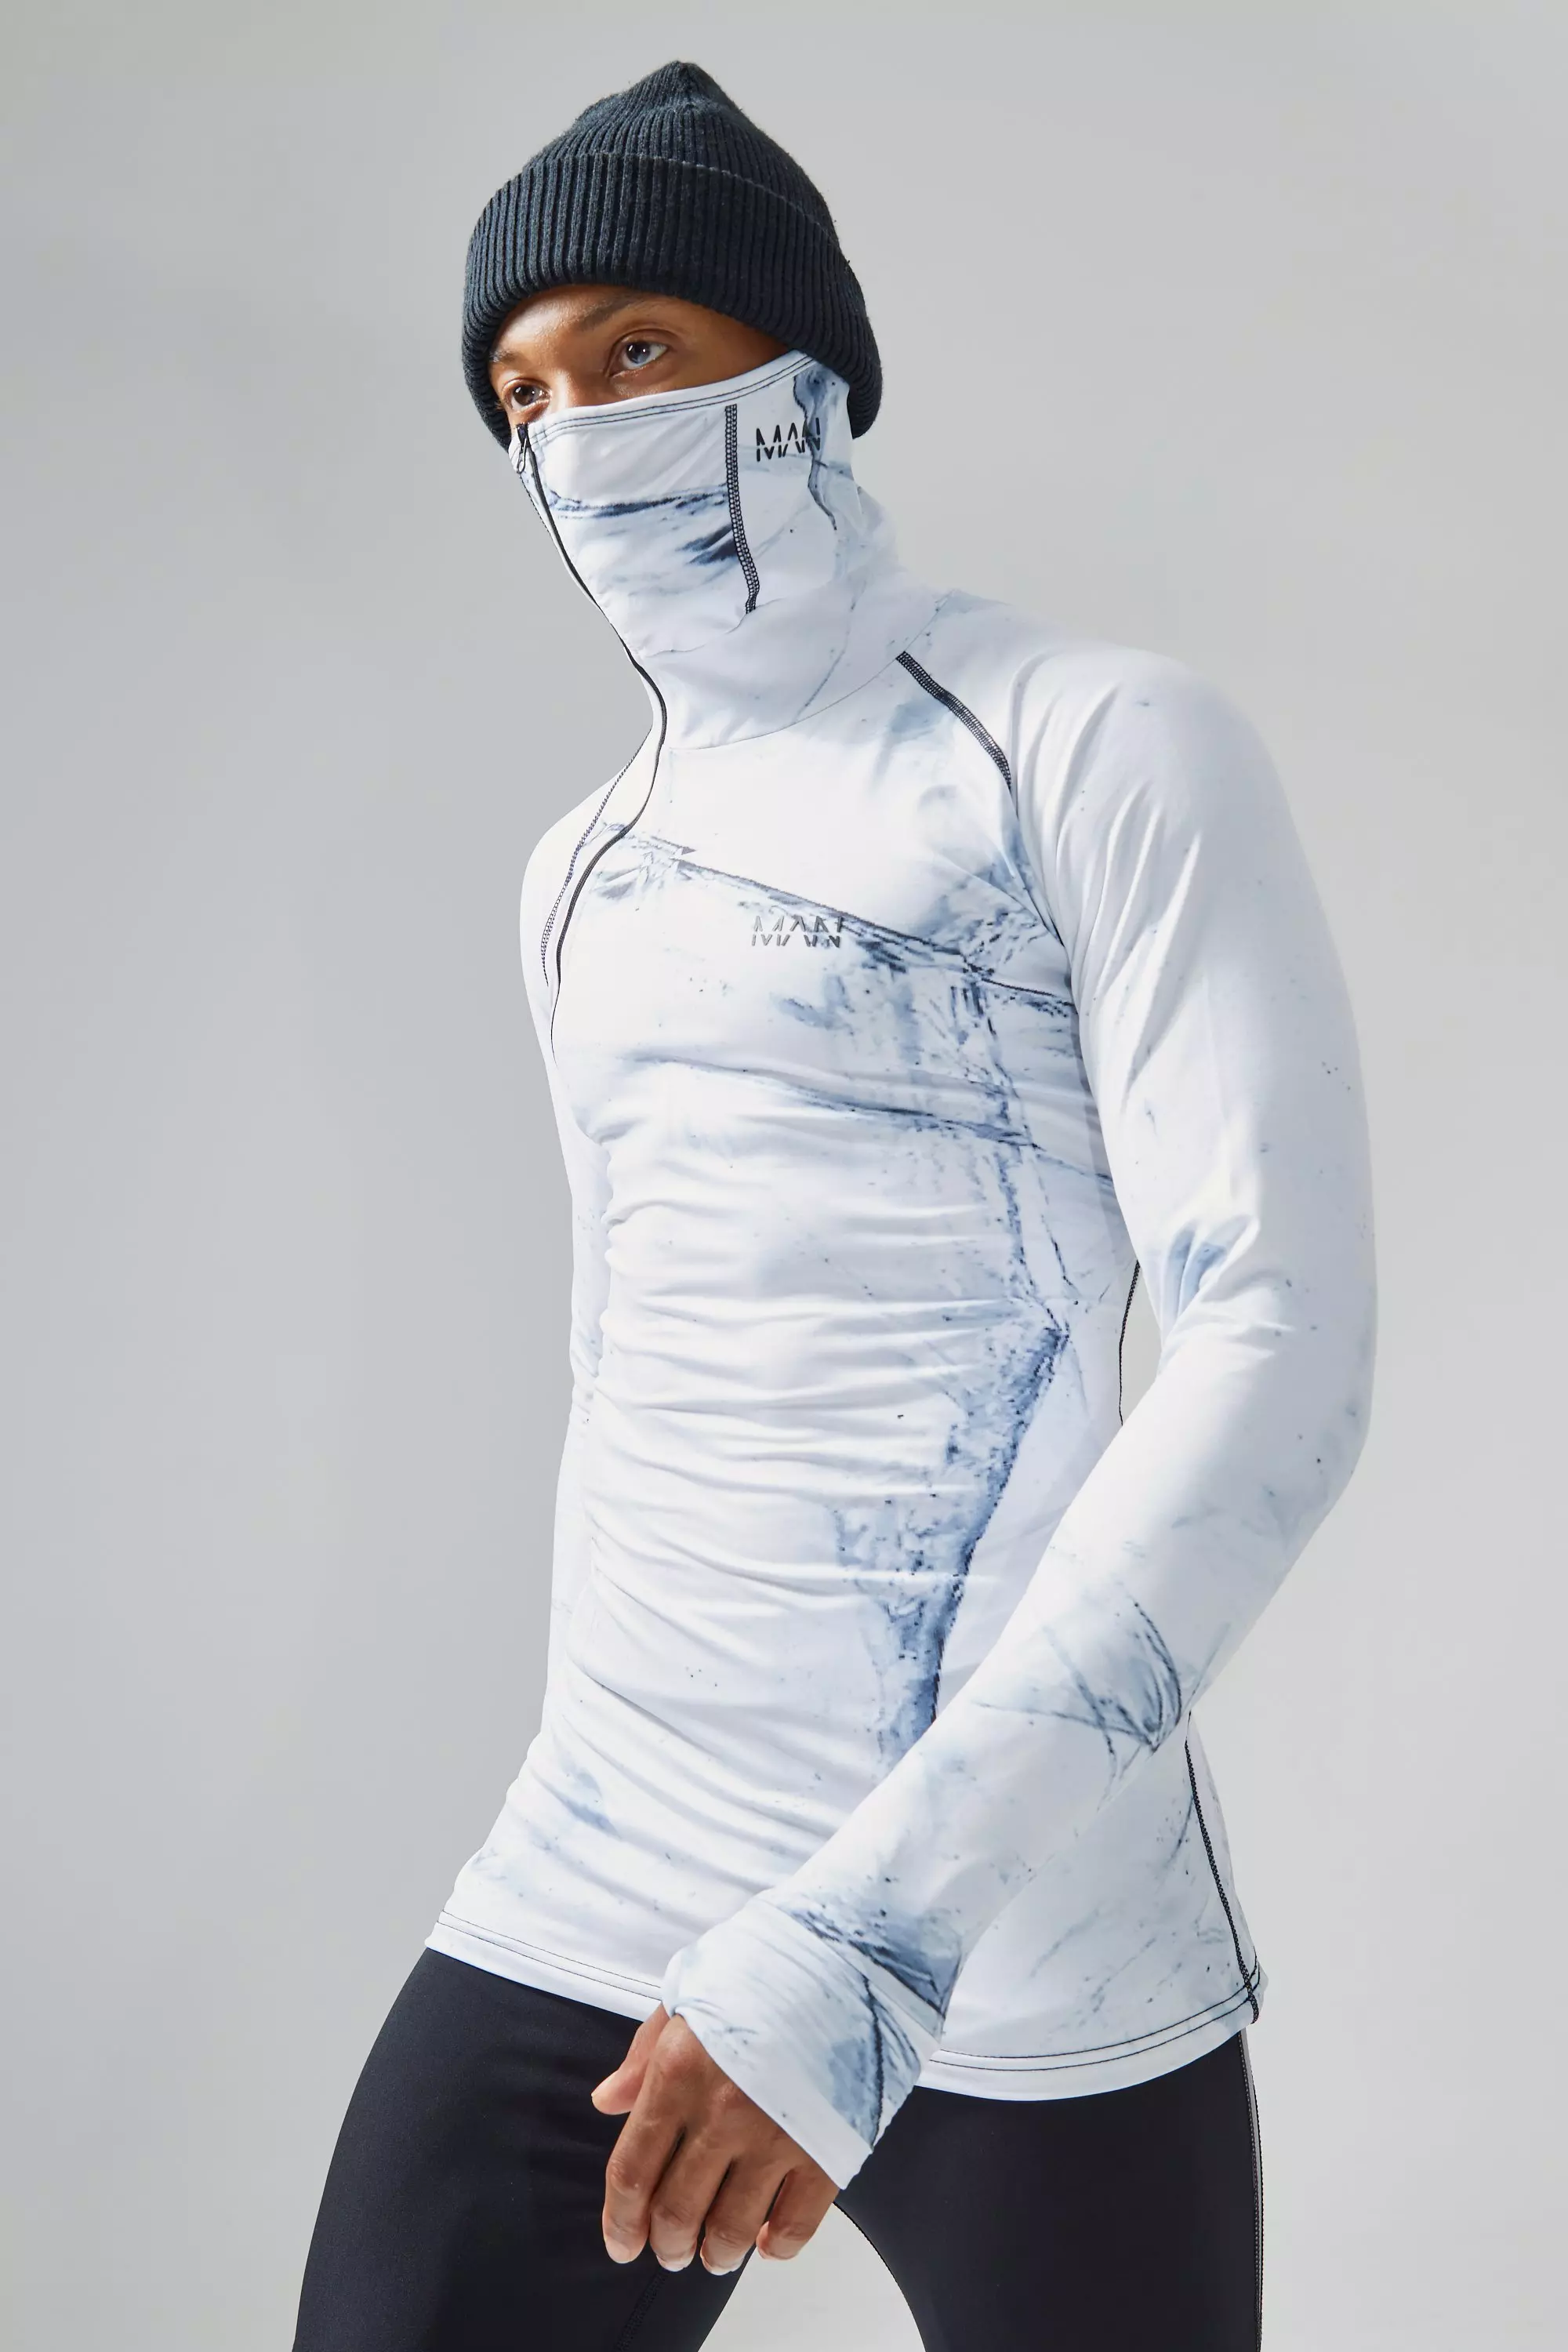 Man Active Matte Face Covering Base Layer White